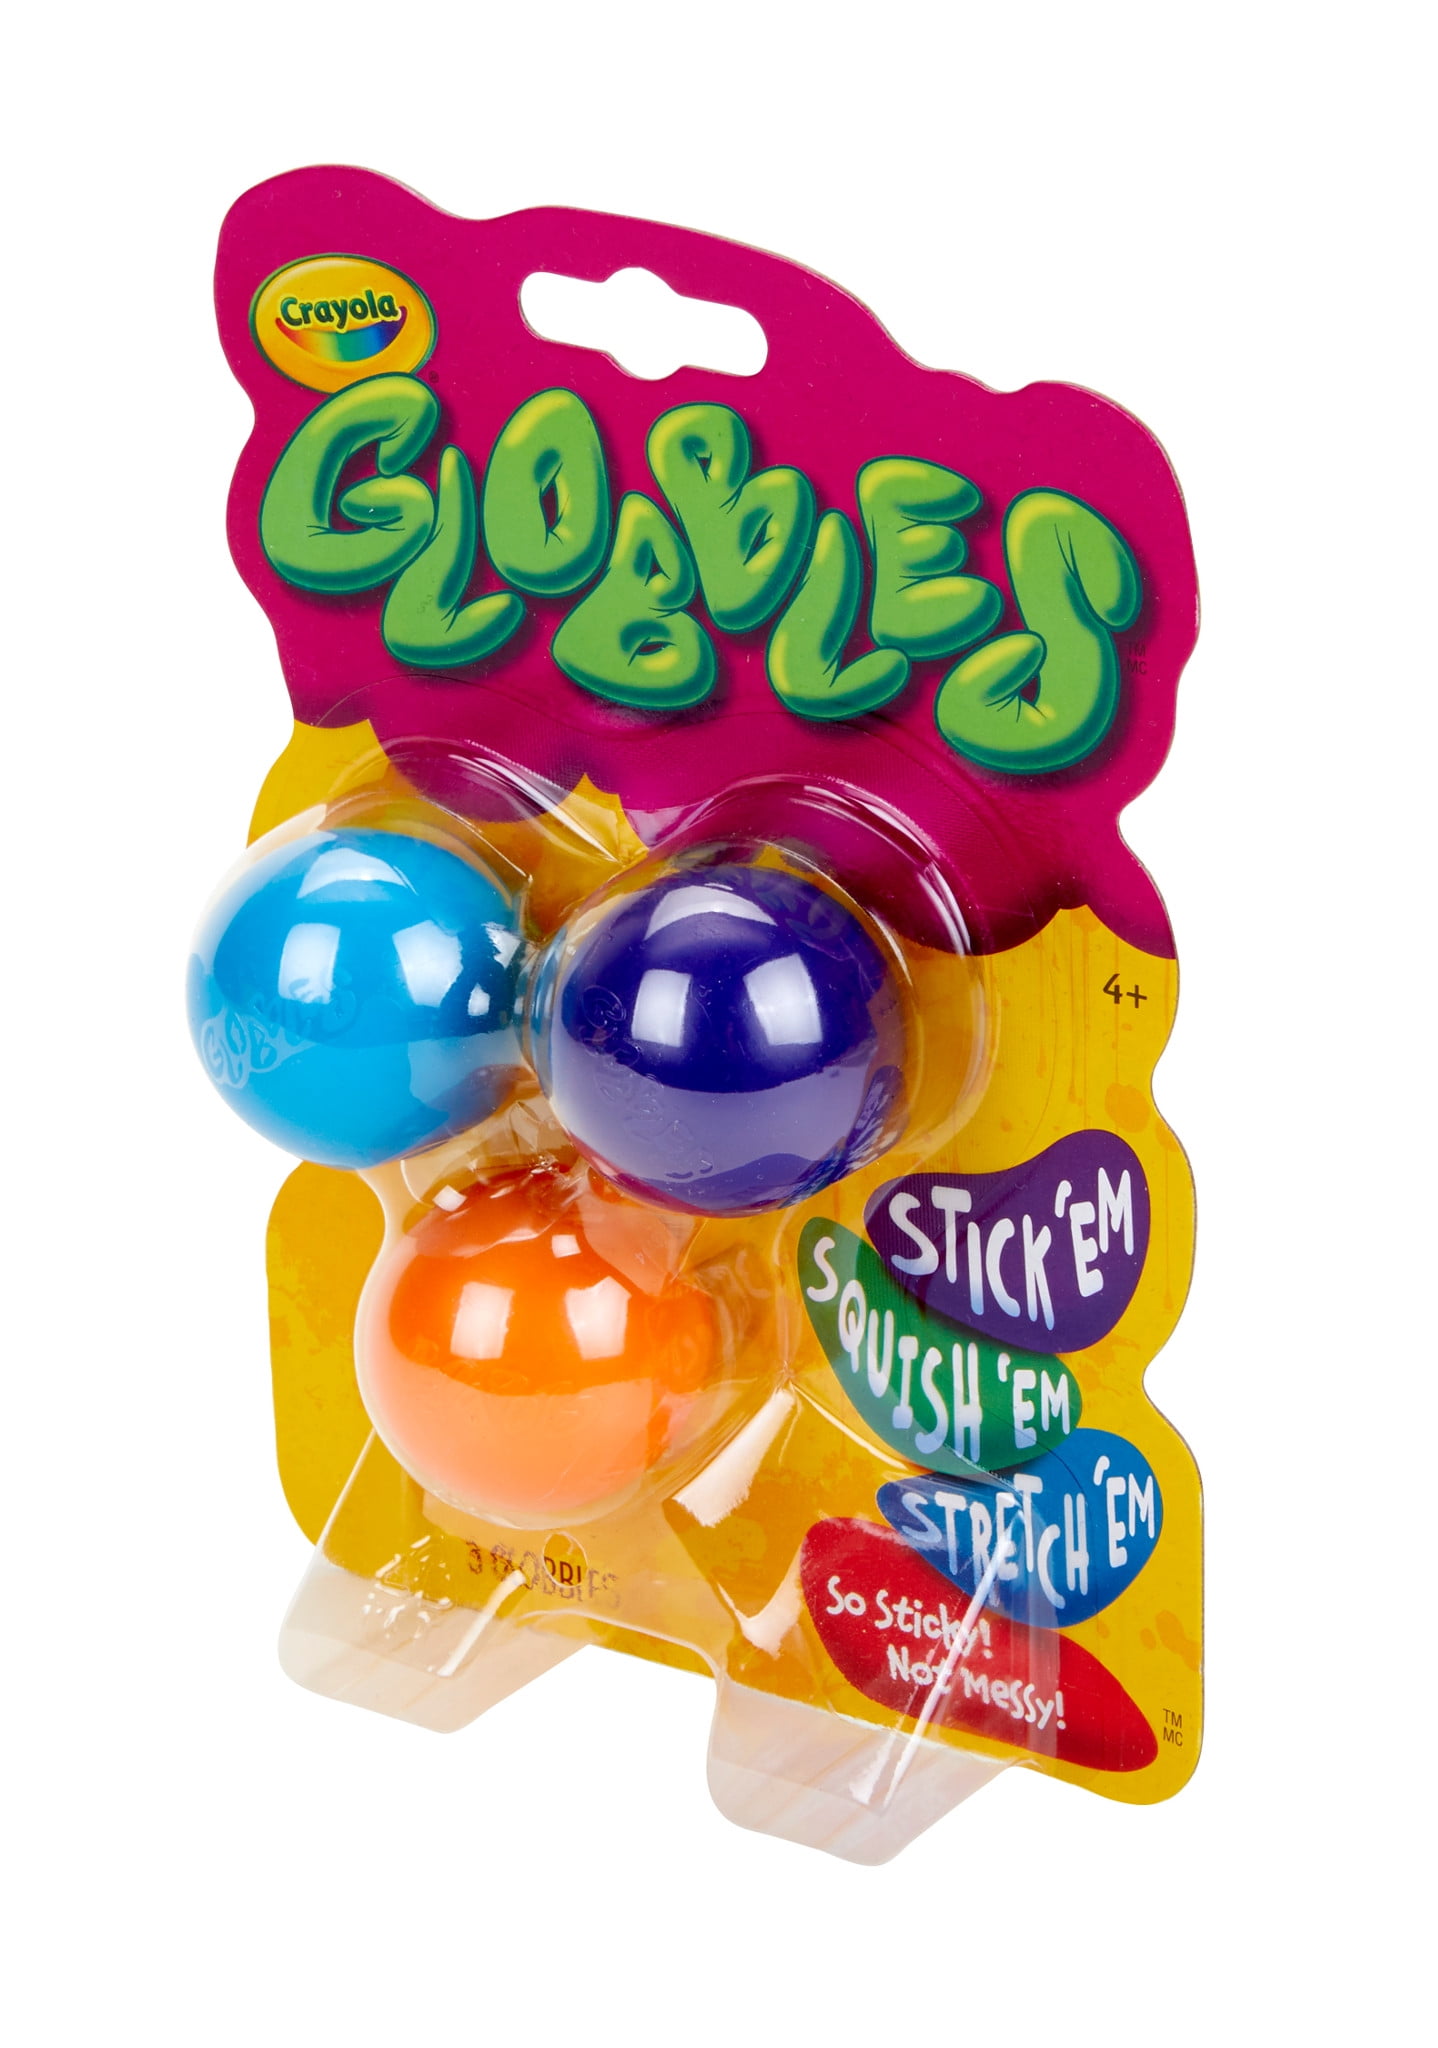 Details about   New Globbles Fidget Toy For Kids Assorted Colors Tiktok Crayola Party Home Decor 